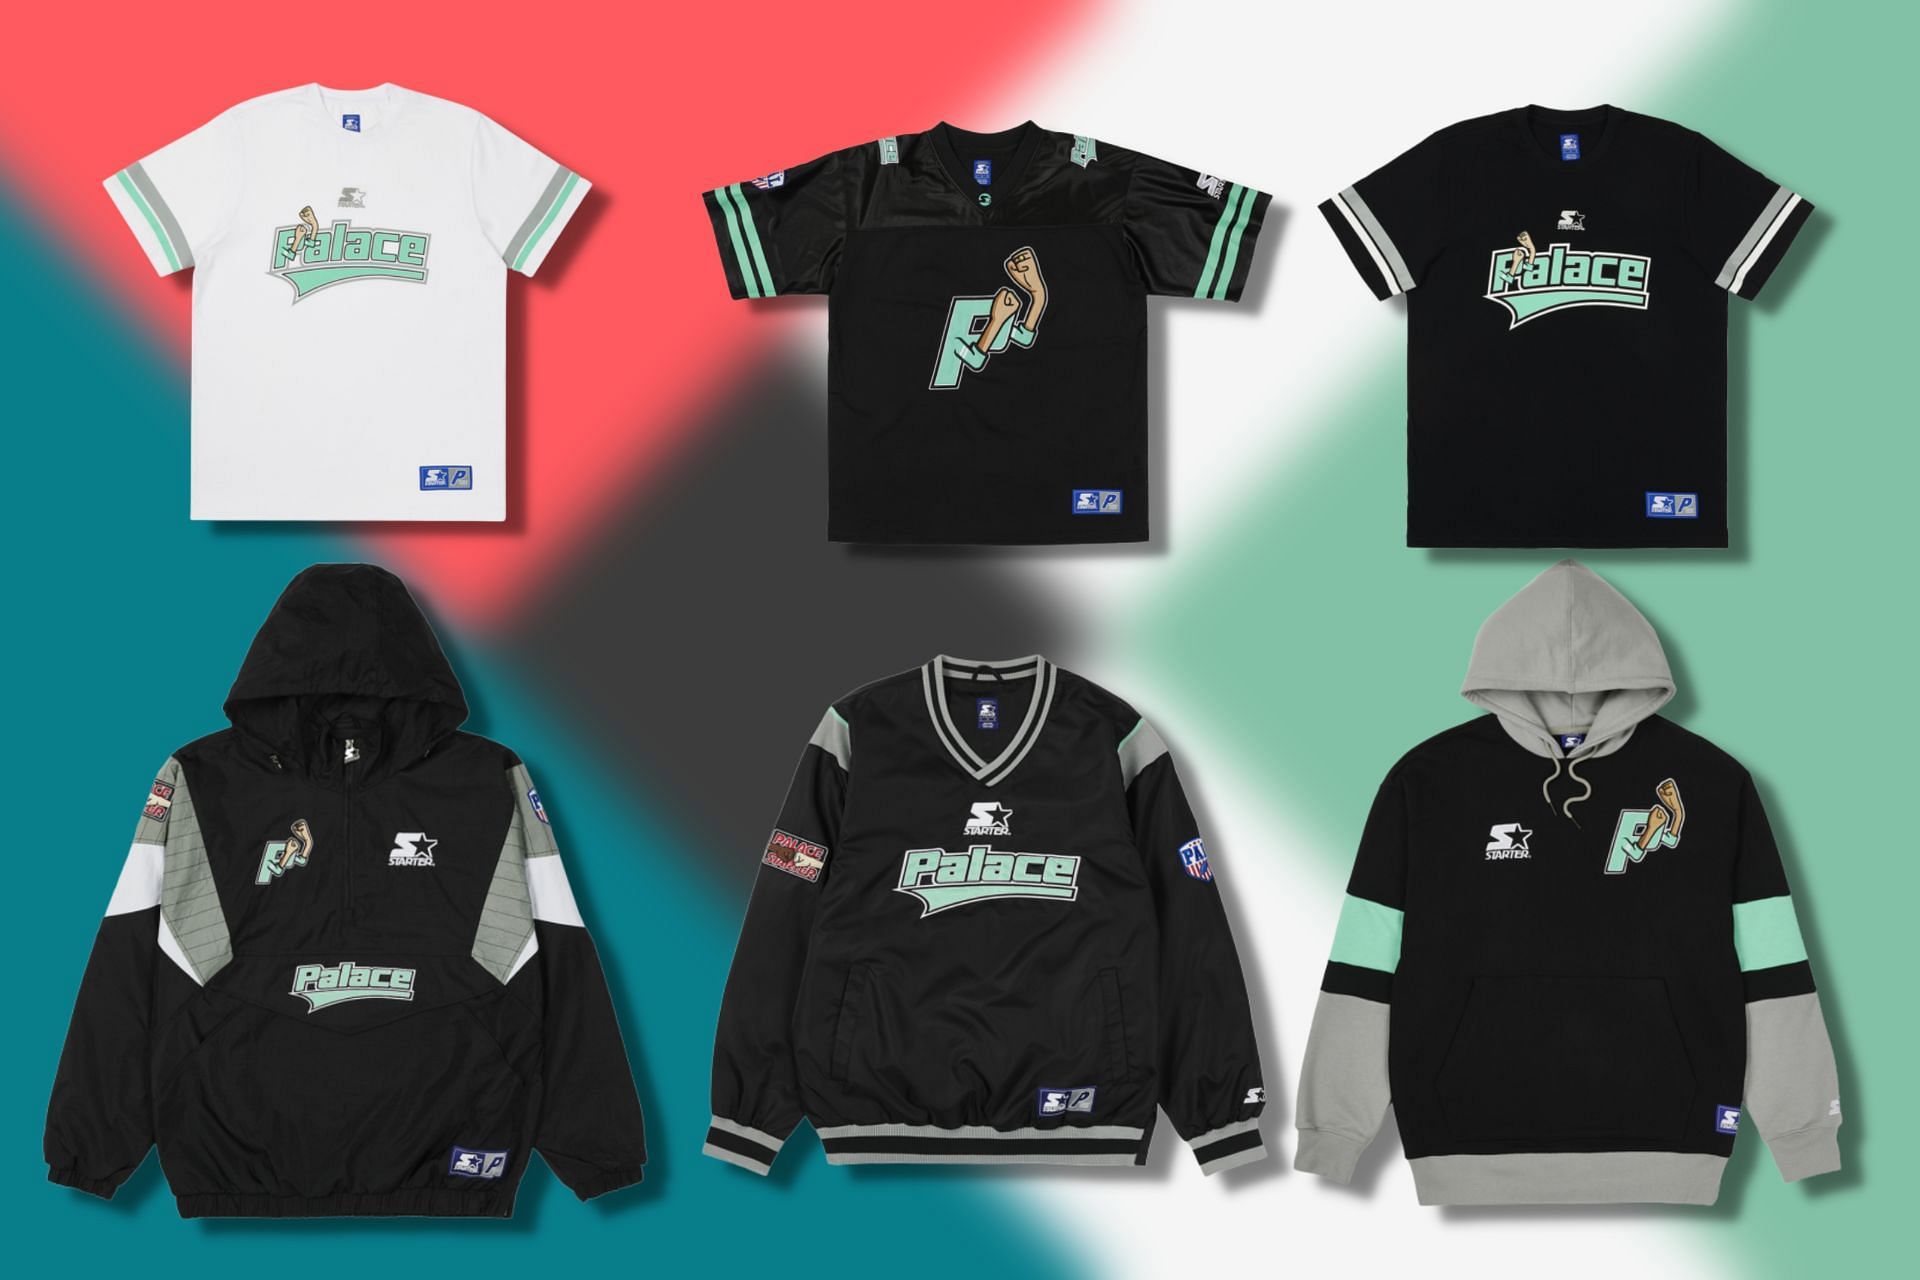 Upcoming sporty streetwear collection from Palace x Starter collaboration (Image via Sportskeeda)